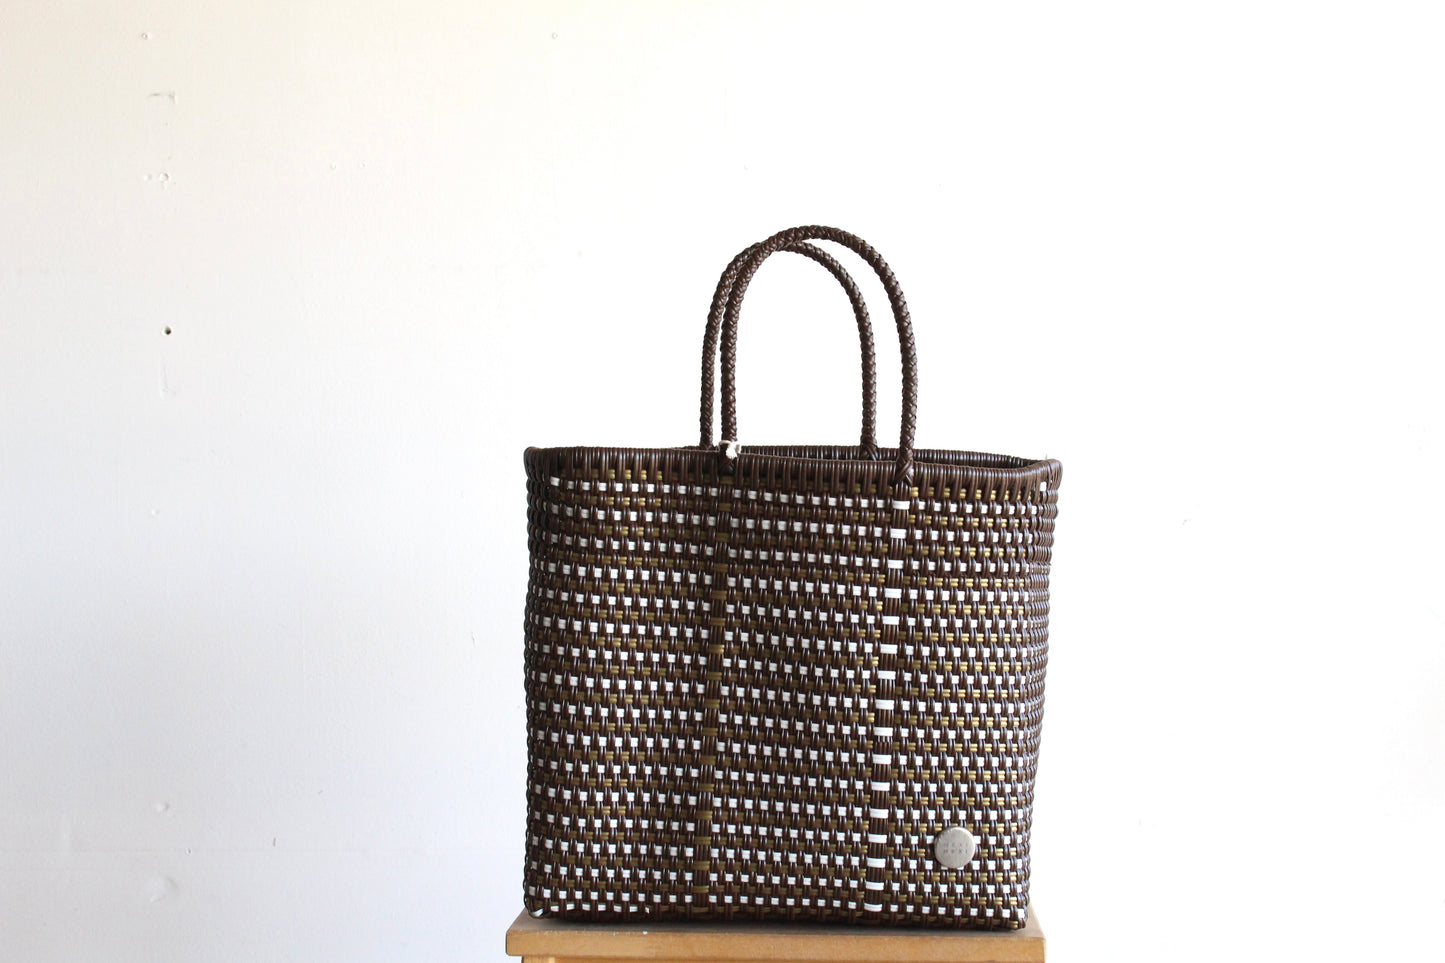 Brown, White & Gold Tote bag by MexiMexi